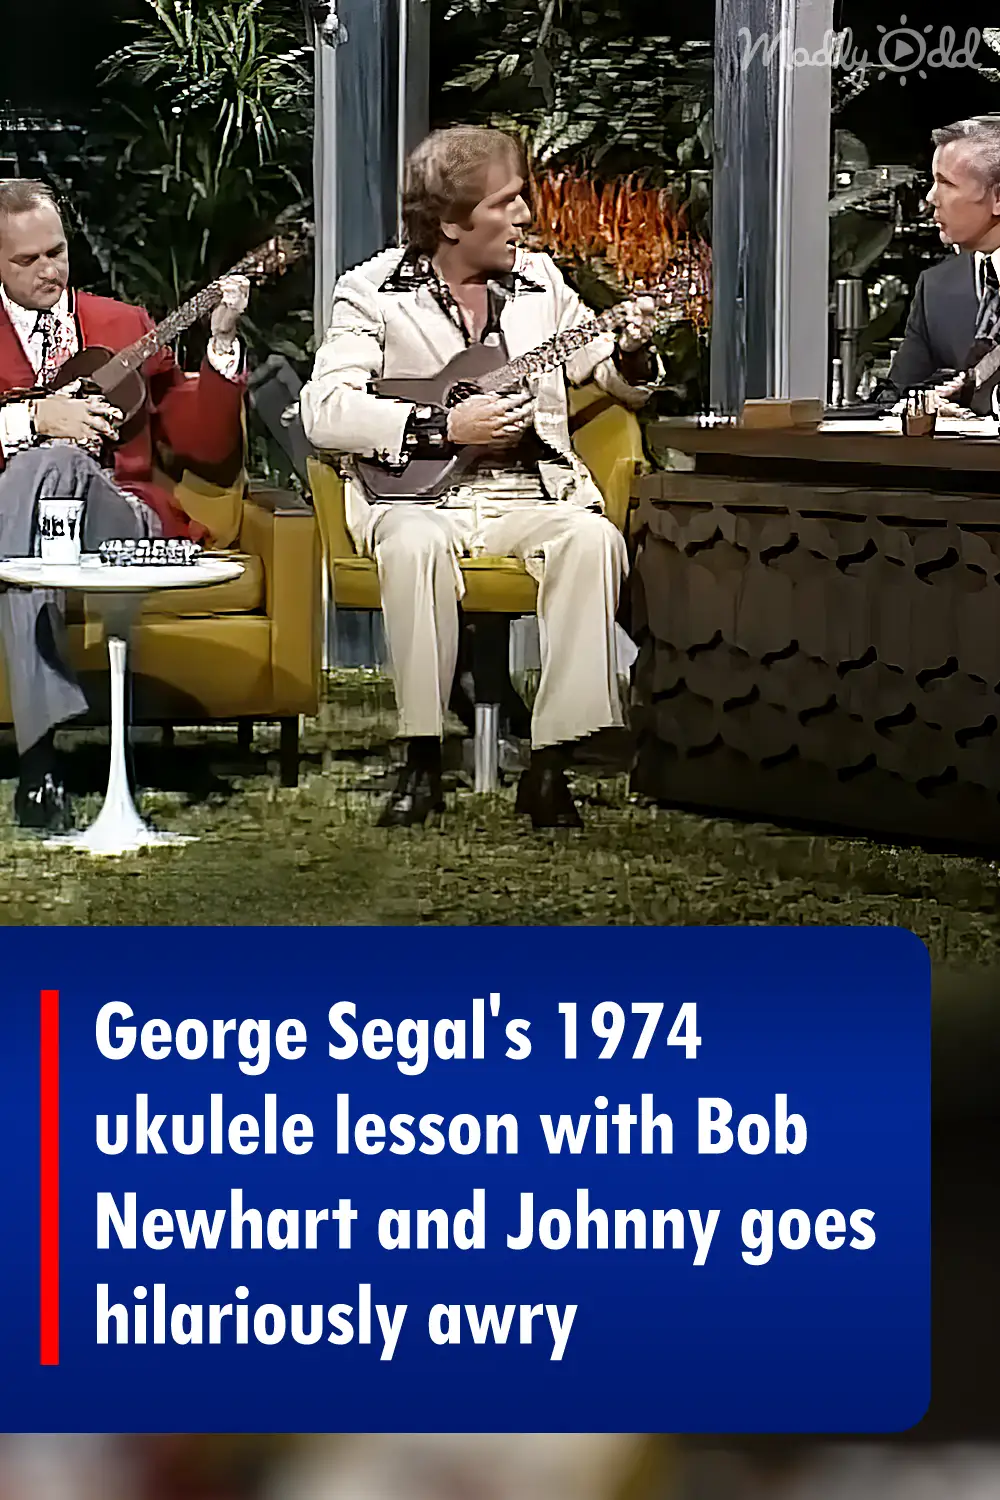 George Segal's 1974 ukulele lesson with Bob Newhart and Johnny goes hilariously awry